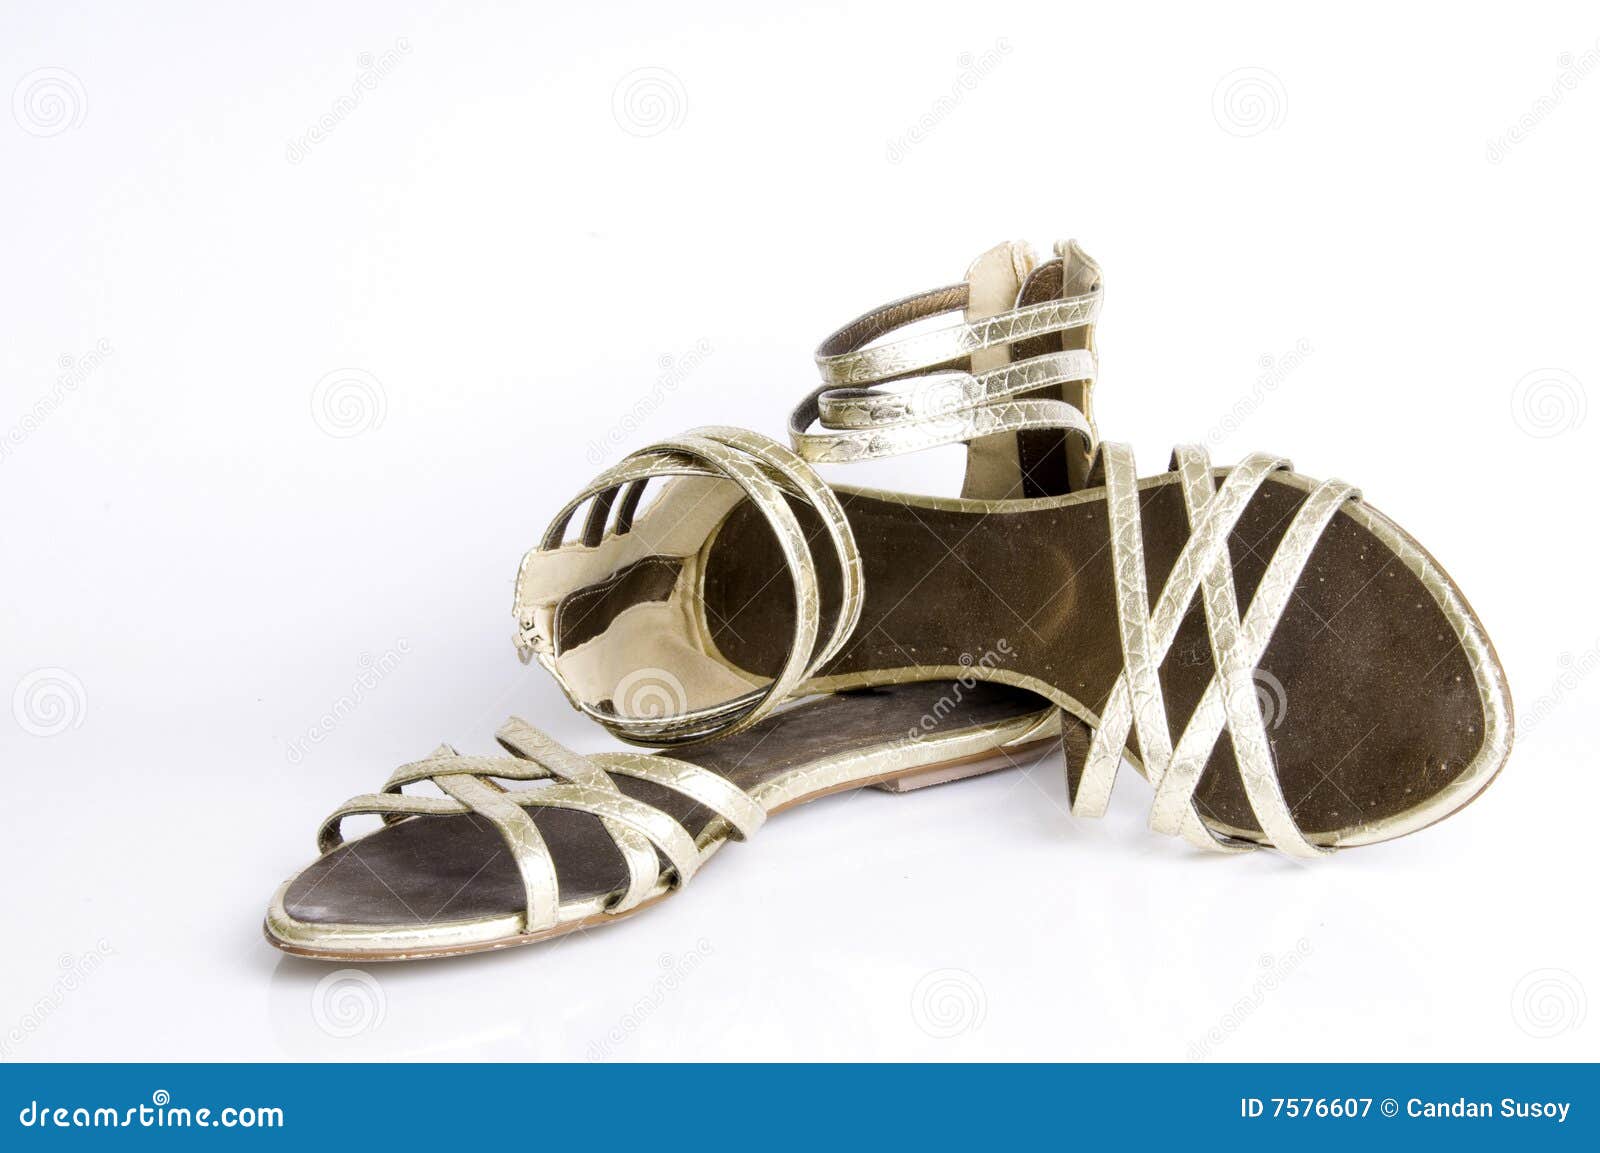 Shoes From Dubai.. Royalty Free Stock Photography - Image: 7576607